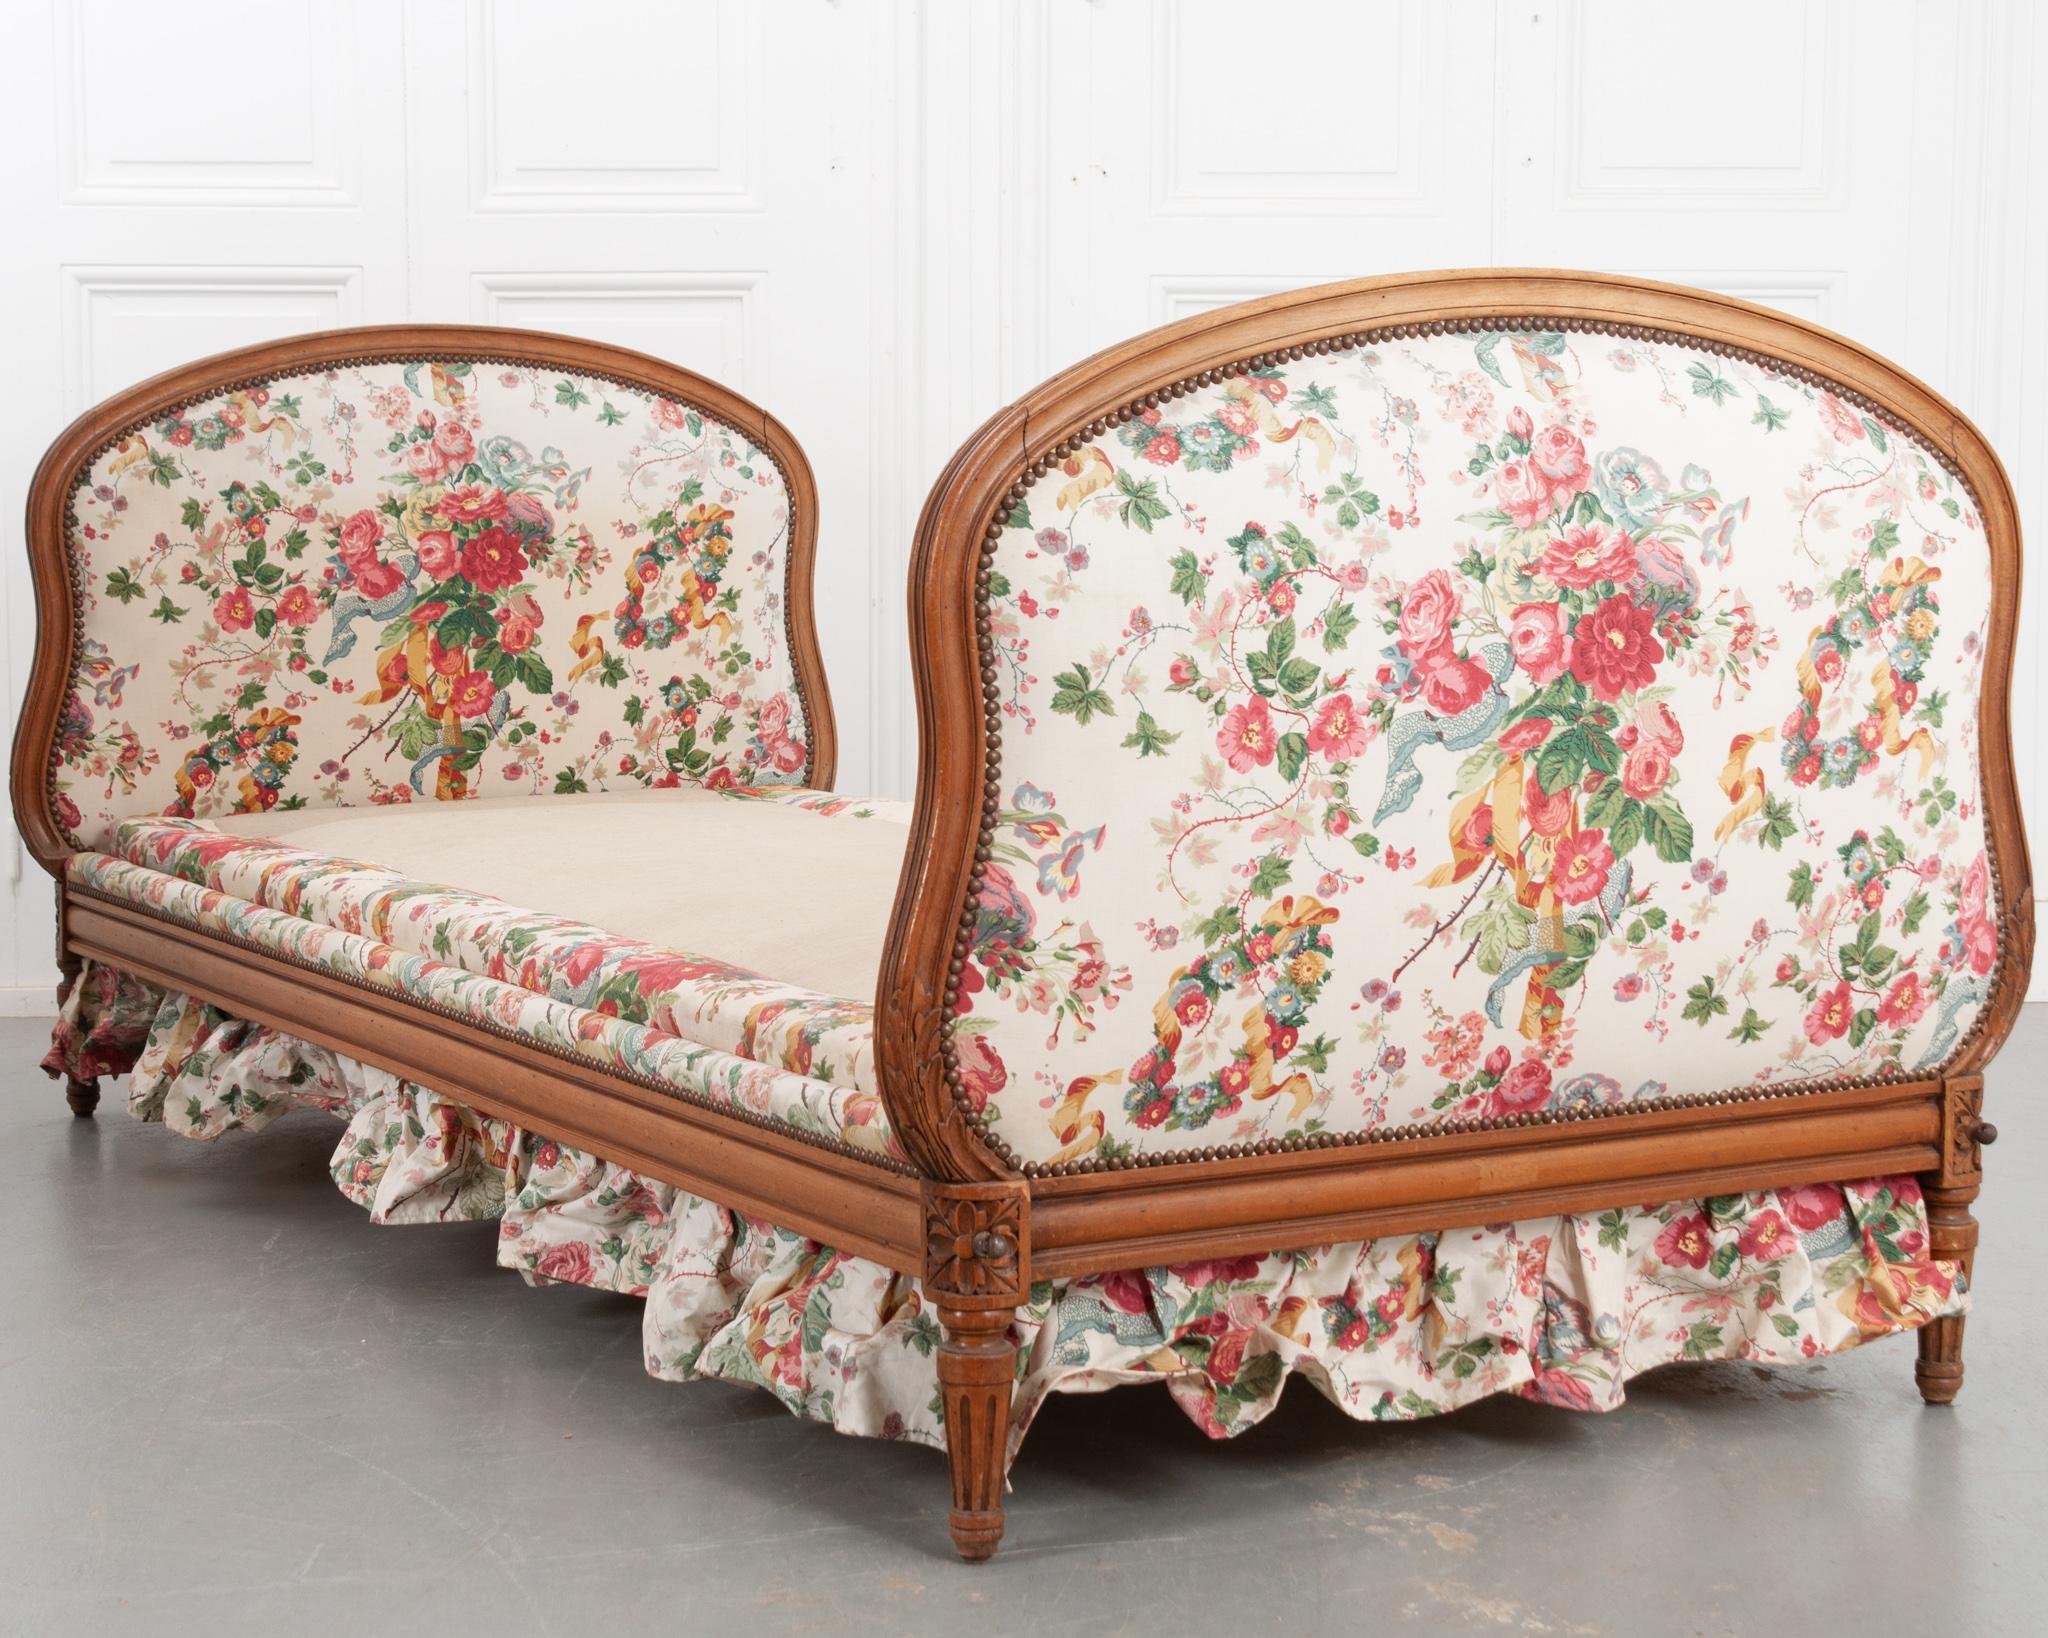 This fantastic day bed from the 1800’s was made of fruitwood in the style of Louis XVI! The shaped headboards are full of great details; a decorative nailhead trim securing the vintage floral fabric, carved rosettes at the corners, and fluted feet.